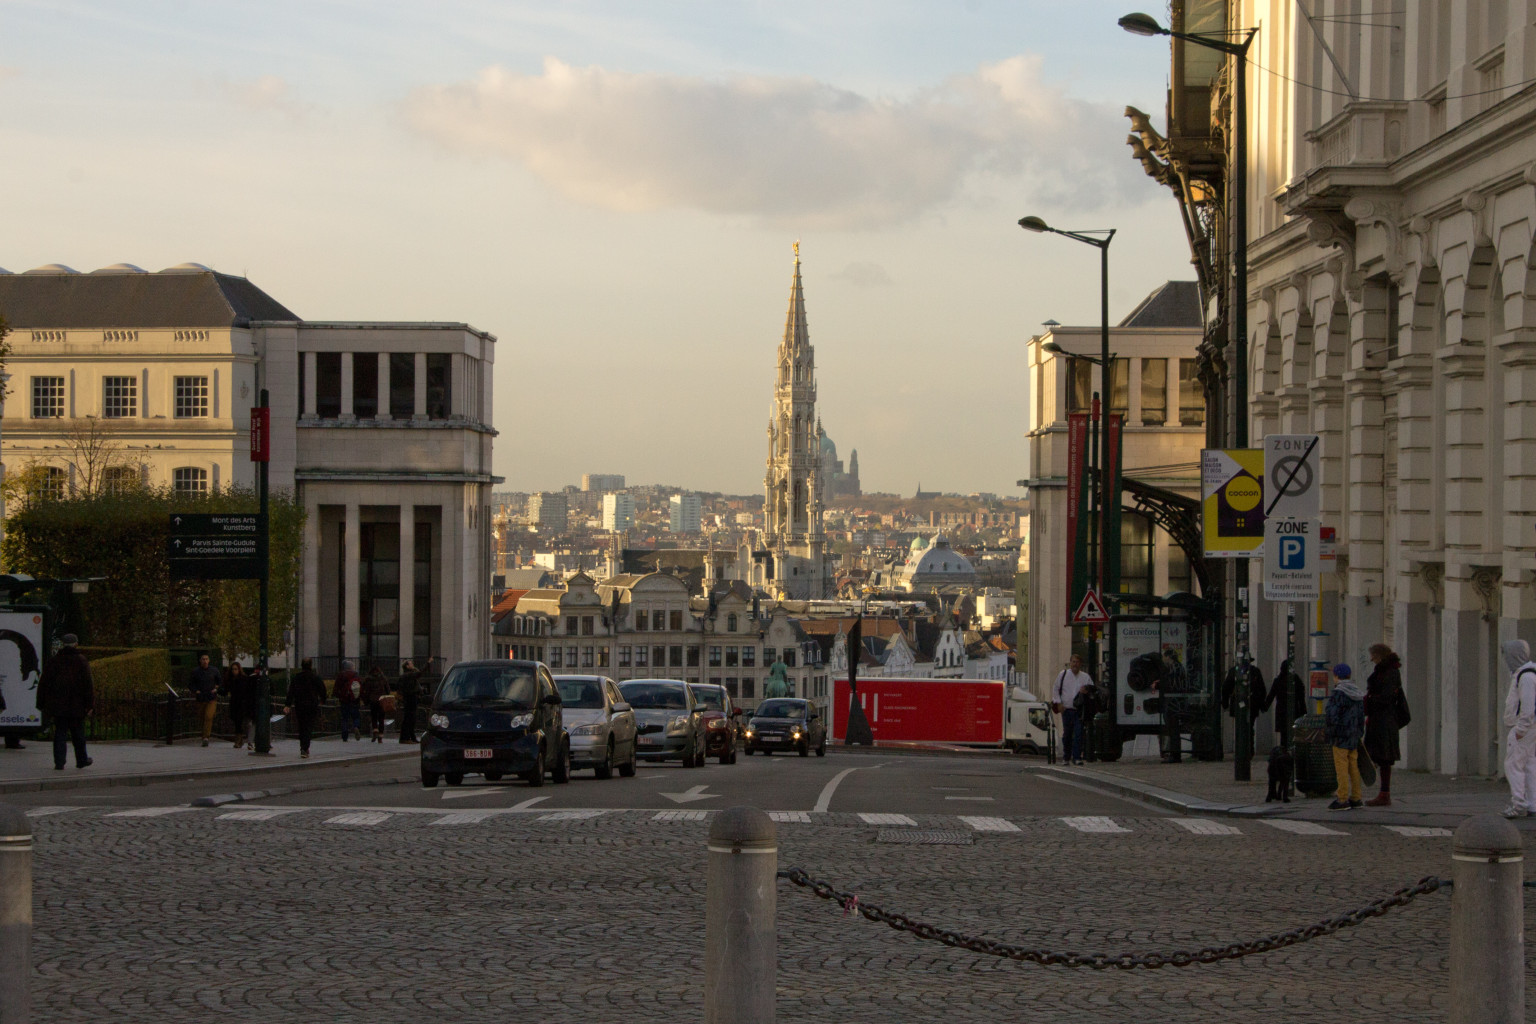 A nice first look down into Brussels proper, with the grand spire of the town hall dominating